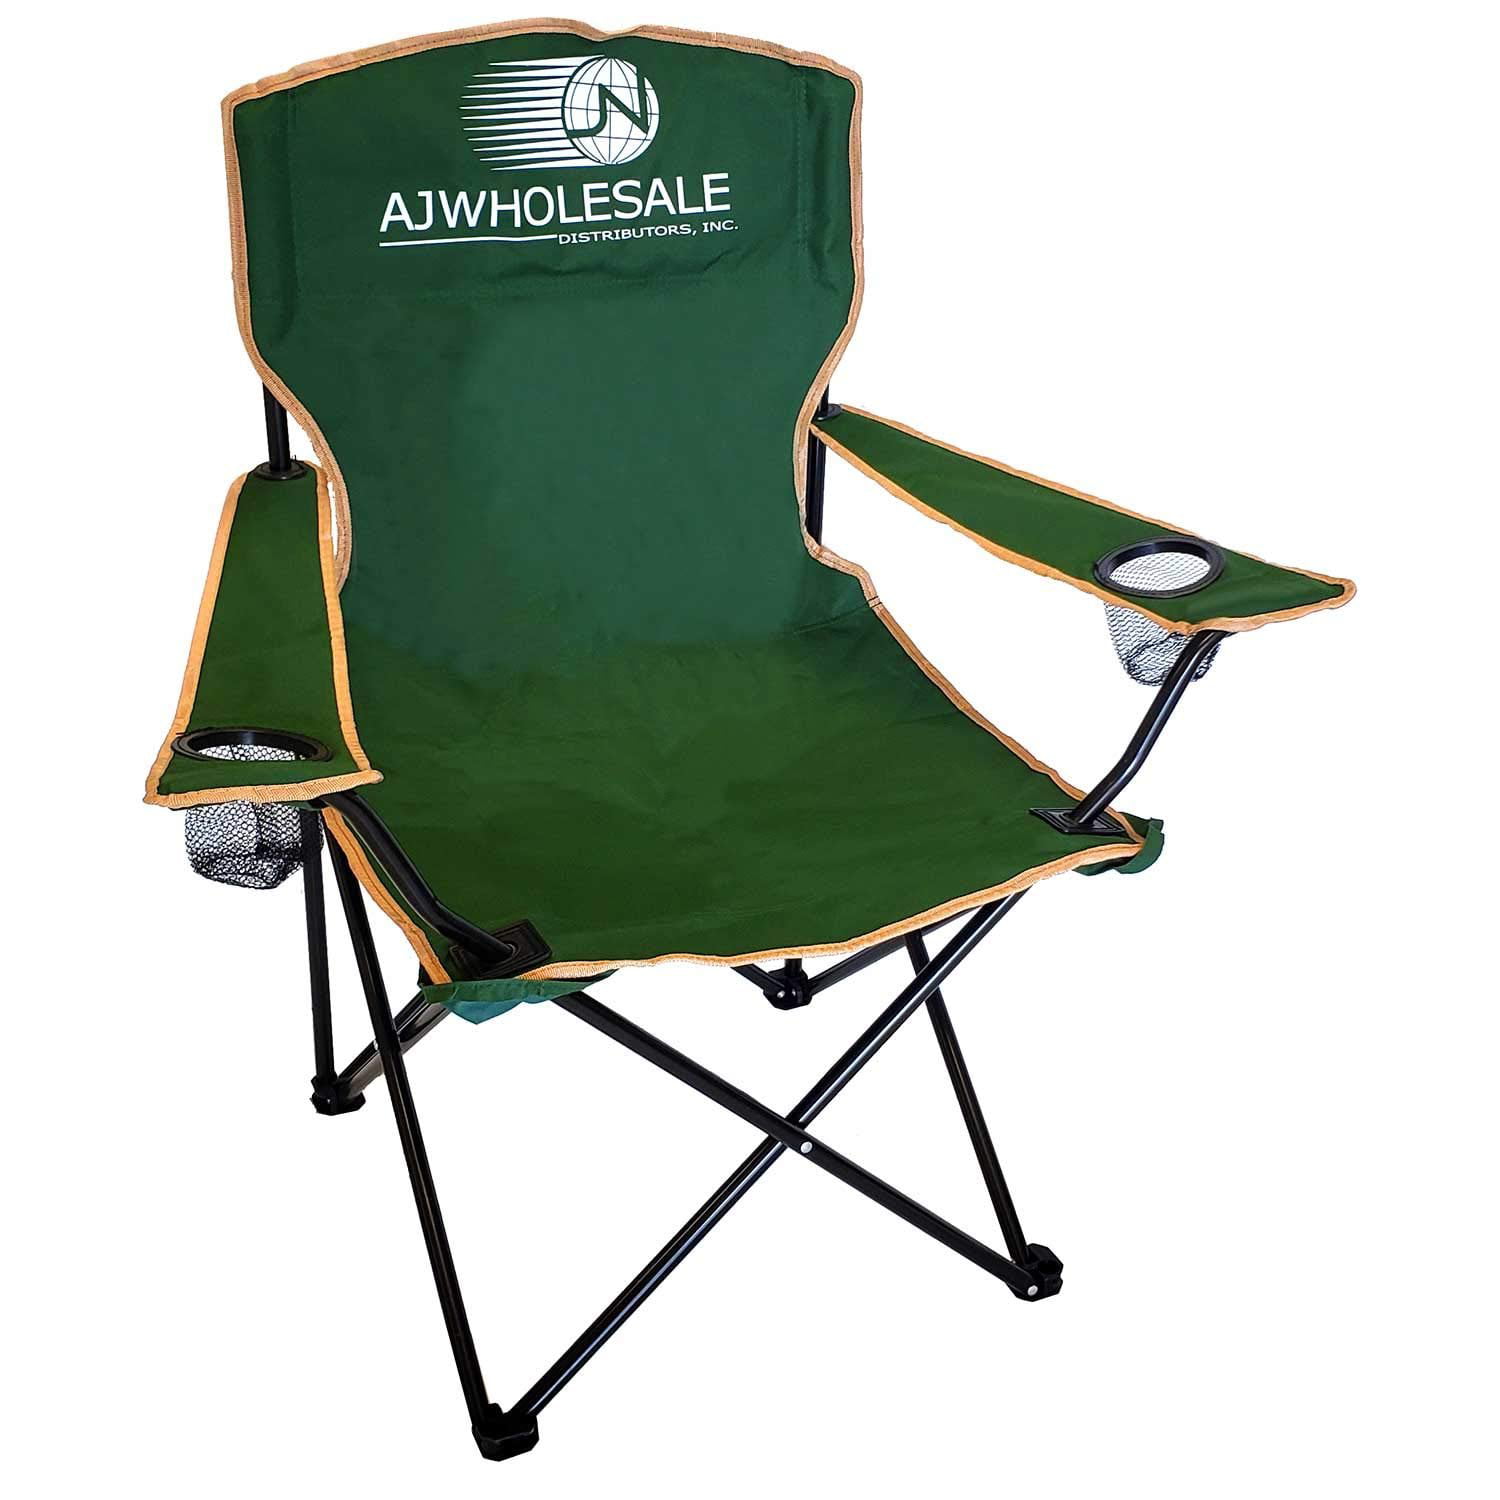 Portable Lightweight Folding Camping and Sports Chair with Arm Rest